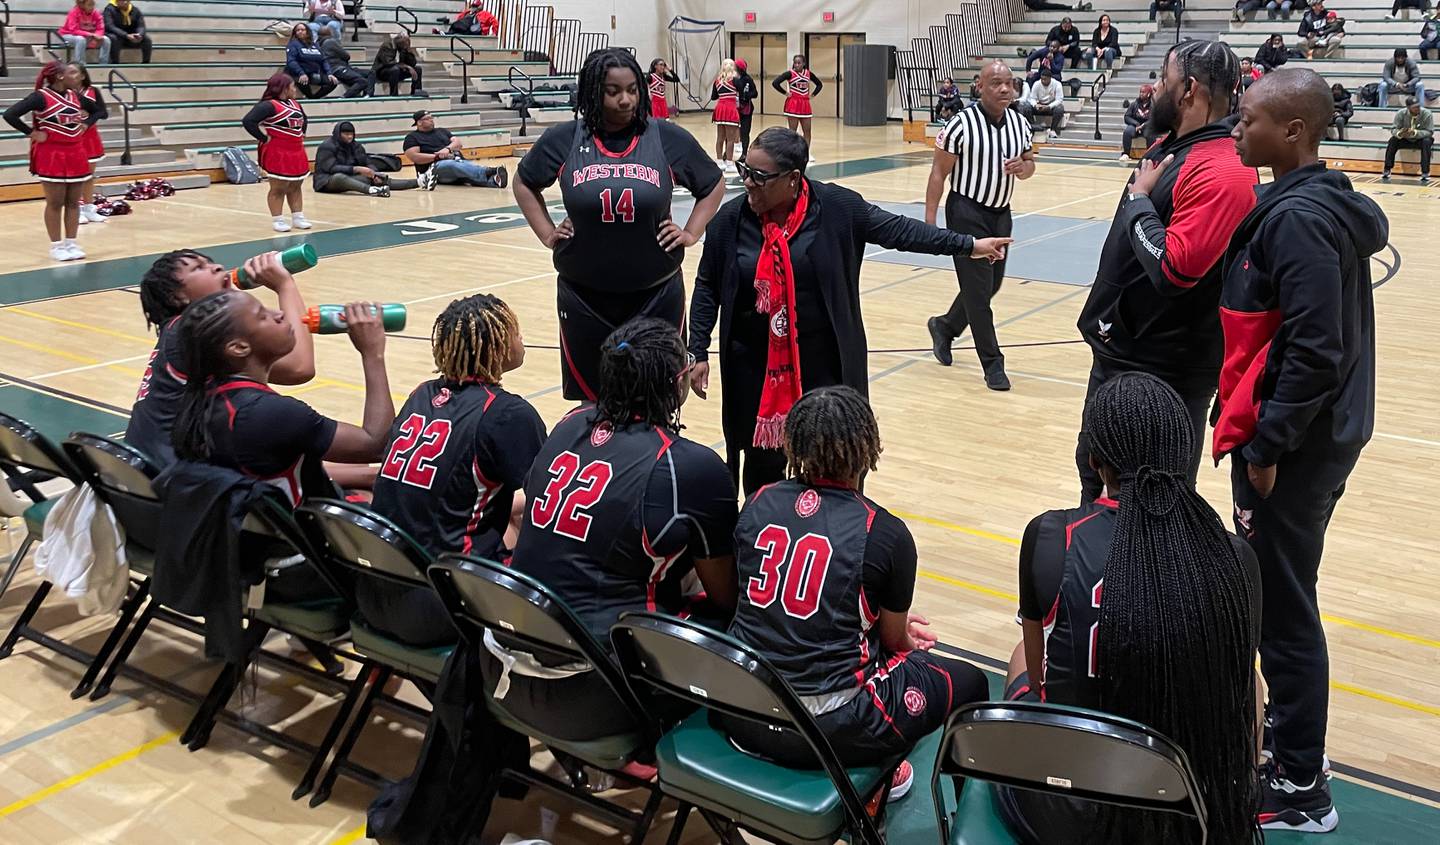 Western basketball coach Tasha Townsend (standing in middle) talks to her team during Friday's Class 4A state girls quarterfinal contest against Charles H. Flowers. The defending state champs and No. 13 Doves advanced to the state semifinals with a 53-42 wire-to-wire victory over the Jaguars in Prince George's County.